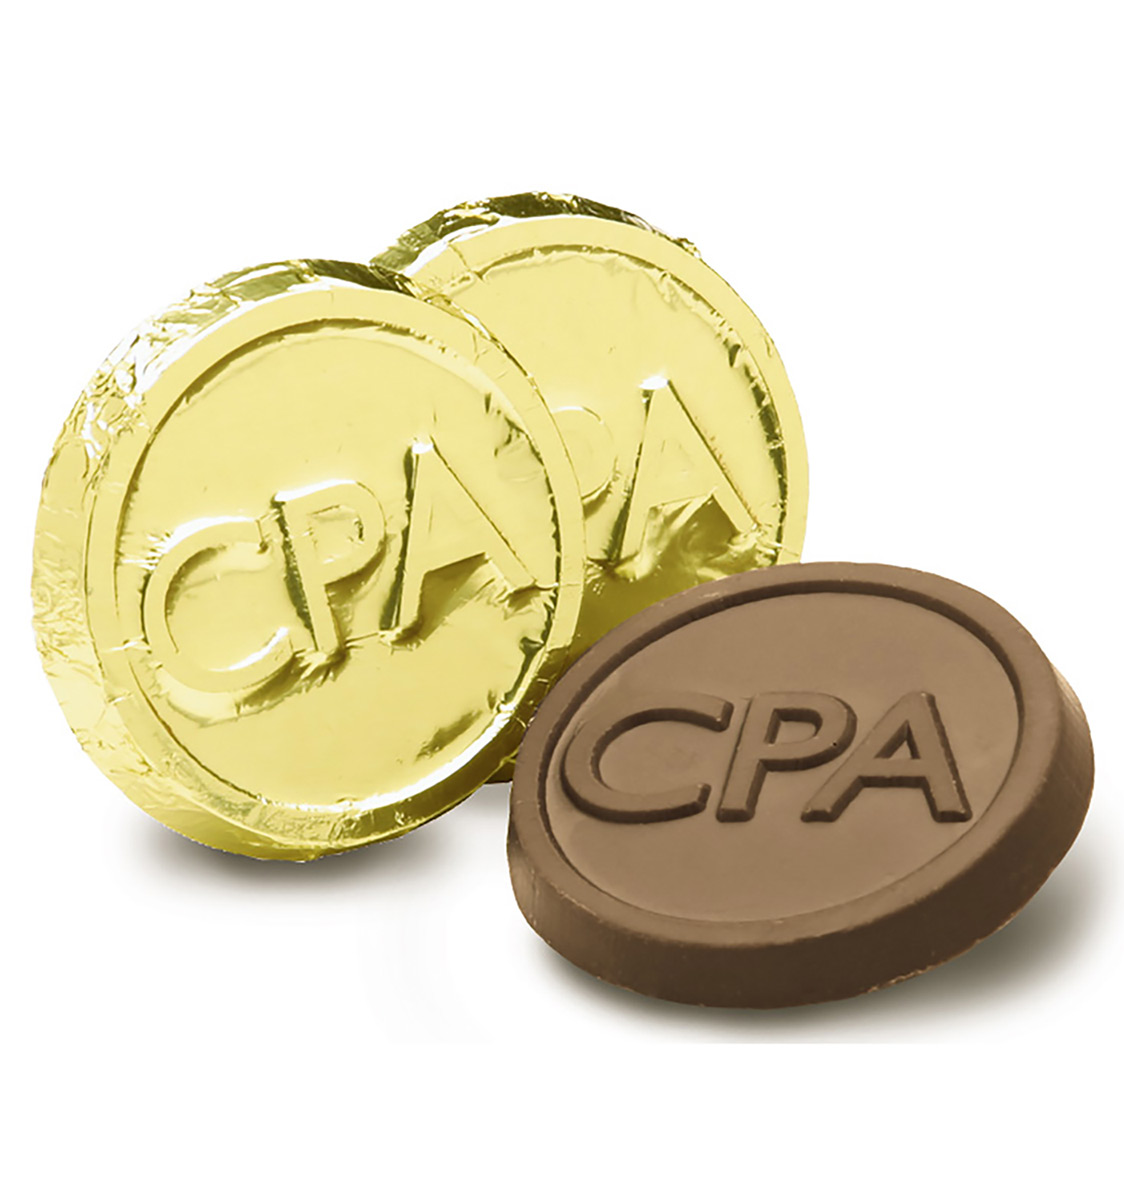 Edible CPA Gift Ideas for Tax Preparer & Accounting Clients